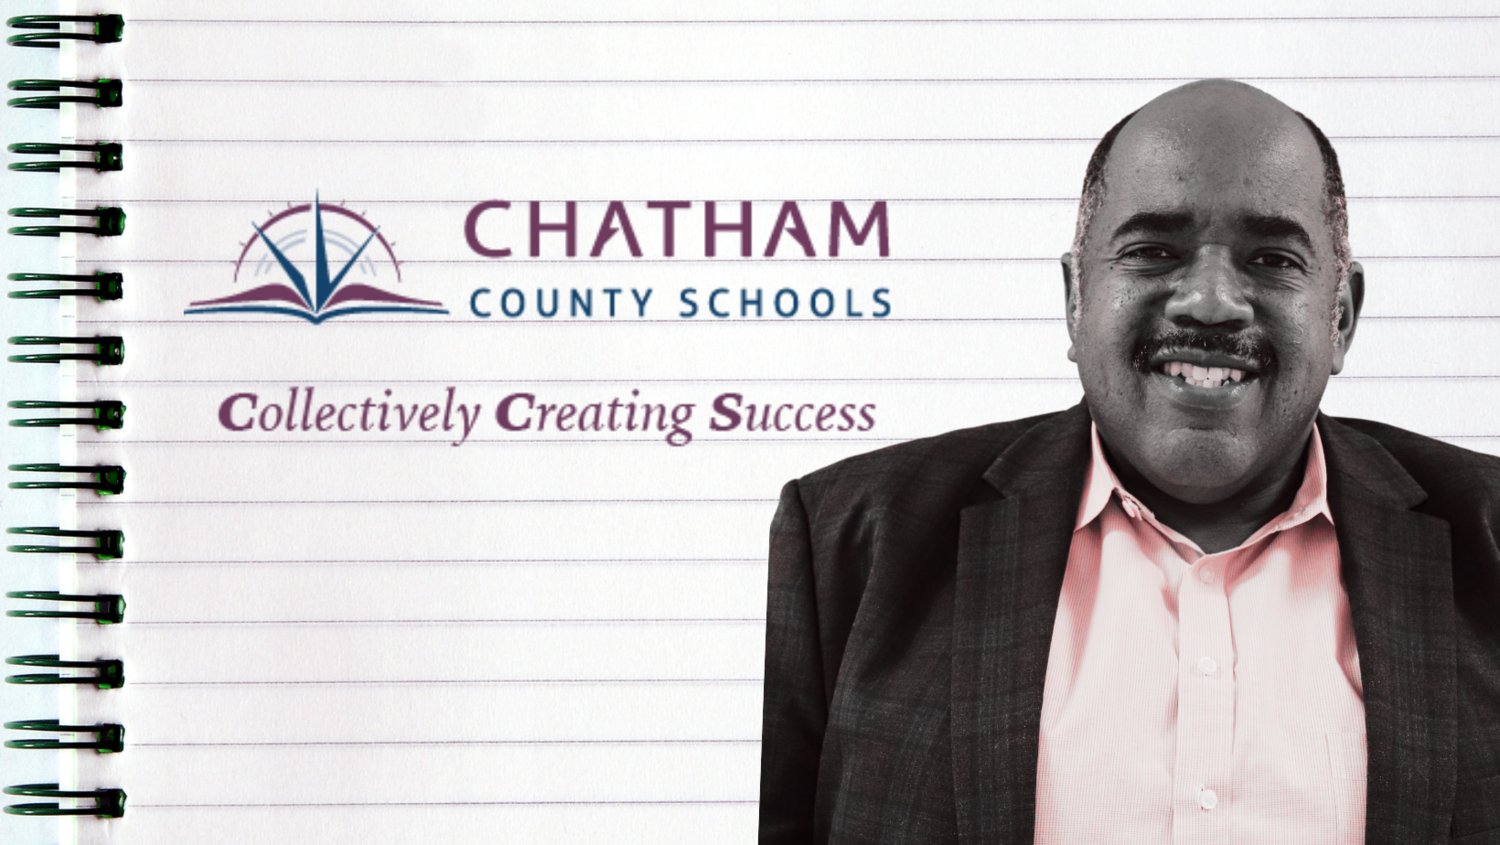 The Chatham County Schools Board of Education selected Chris Poston, the current executive director for elementary and middle grades education, to lead the district’s equity efforts as CCS’s Executive Director for Excellence and Opportunity.